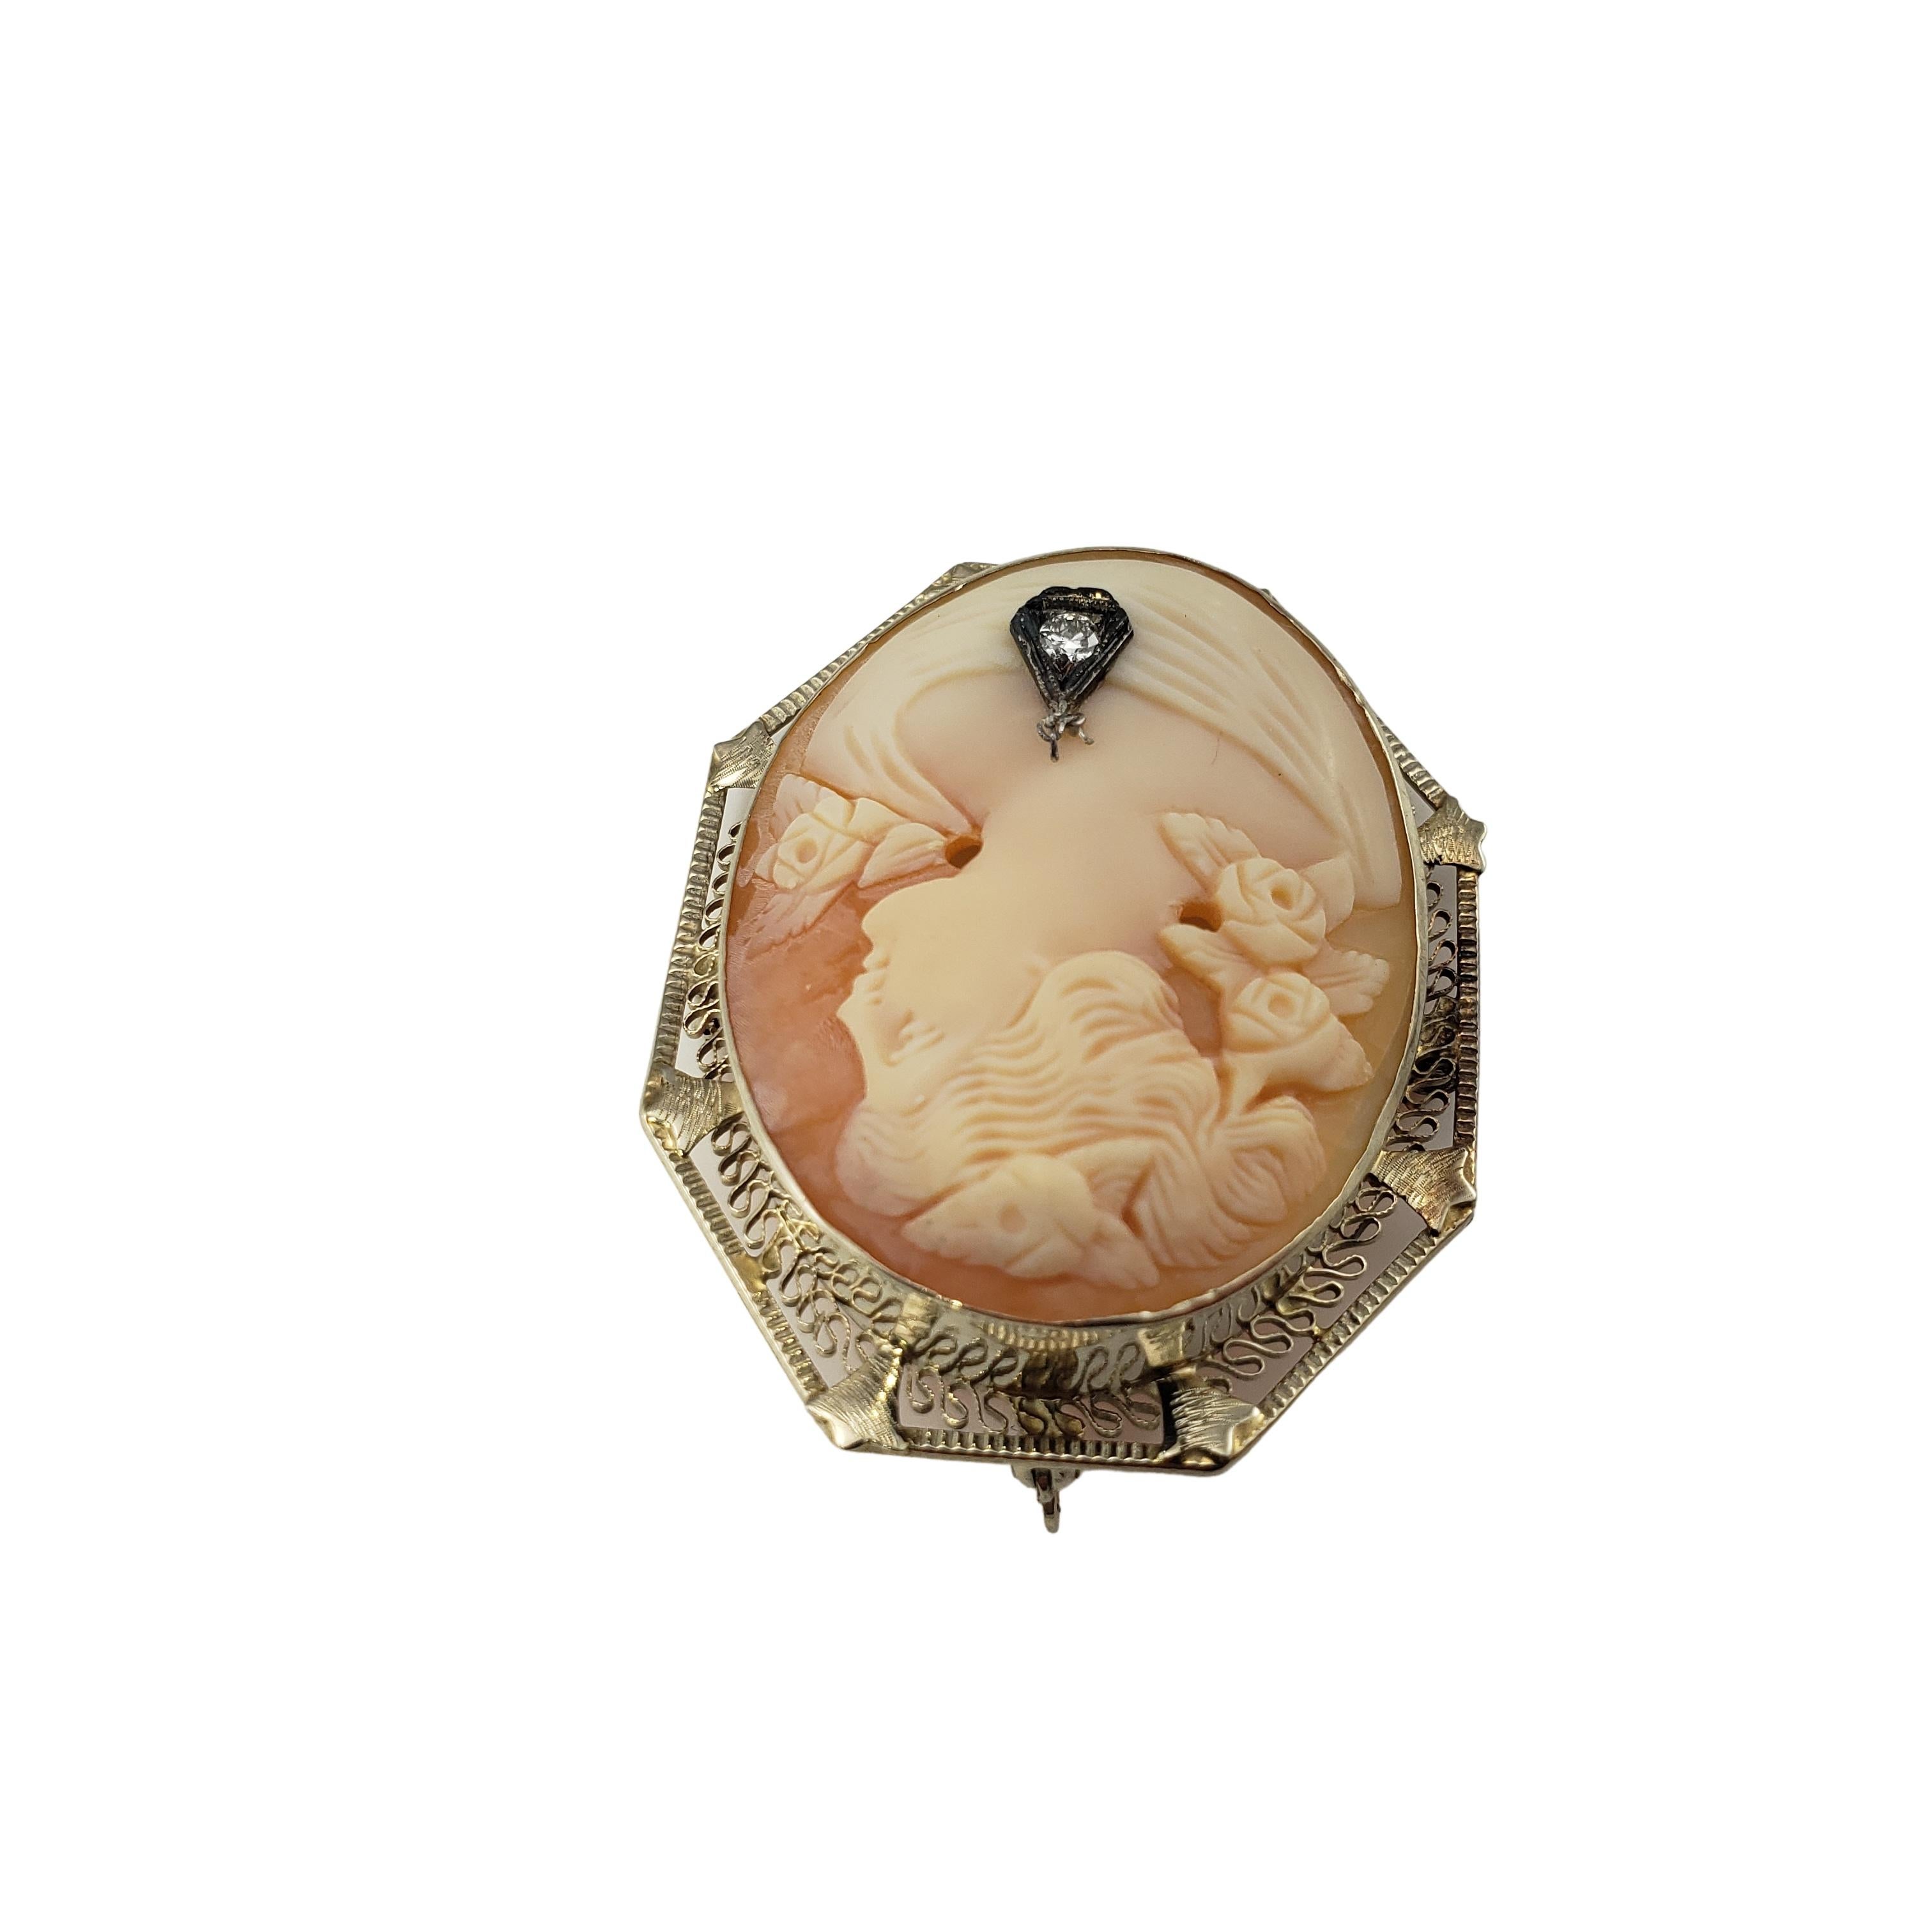 Vintage 14 Karat Yellow and Diamond Cameo Brooch/Pendant-

This elegant cameo brooch features a lovely lady in profile accented with one round brilliant cut diamond and set in delicate yellow gold filigree. Can be worn as a brooch or a